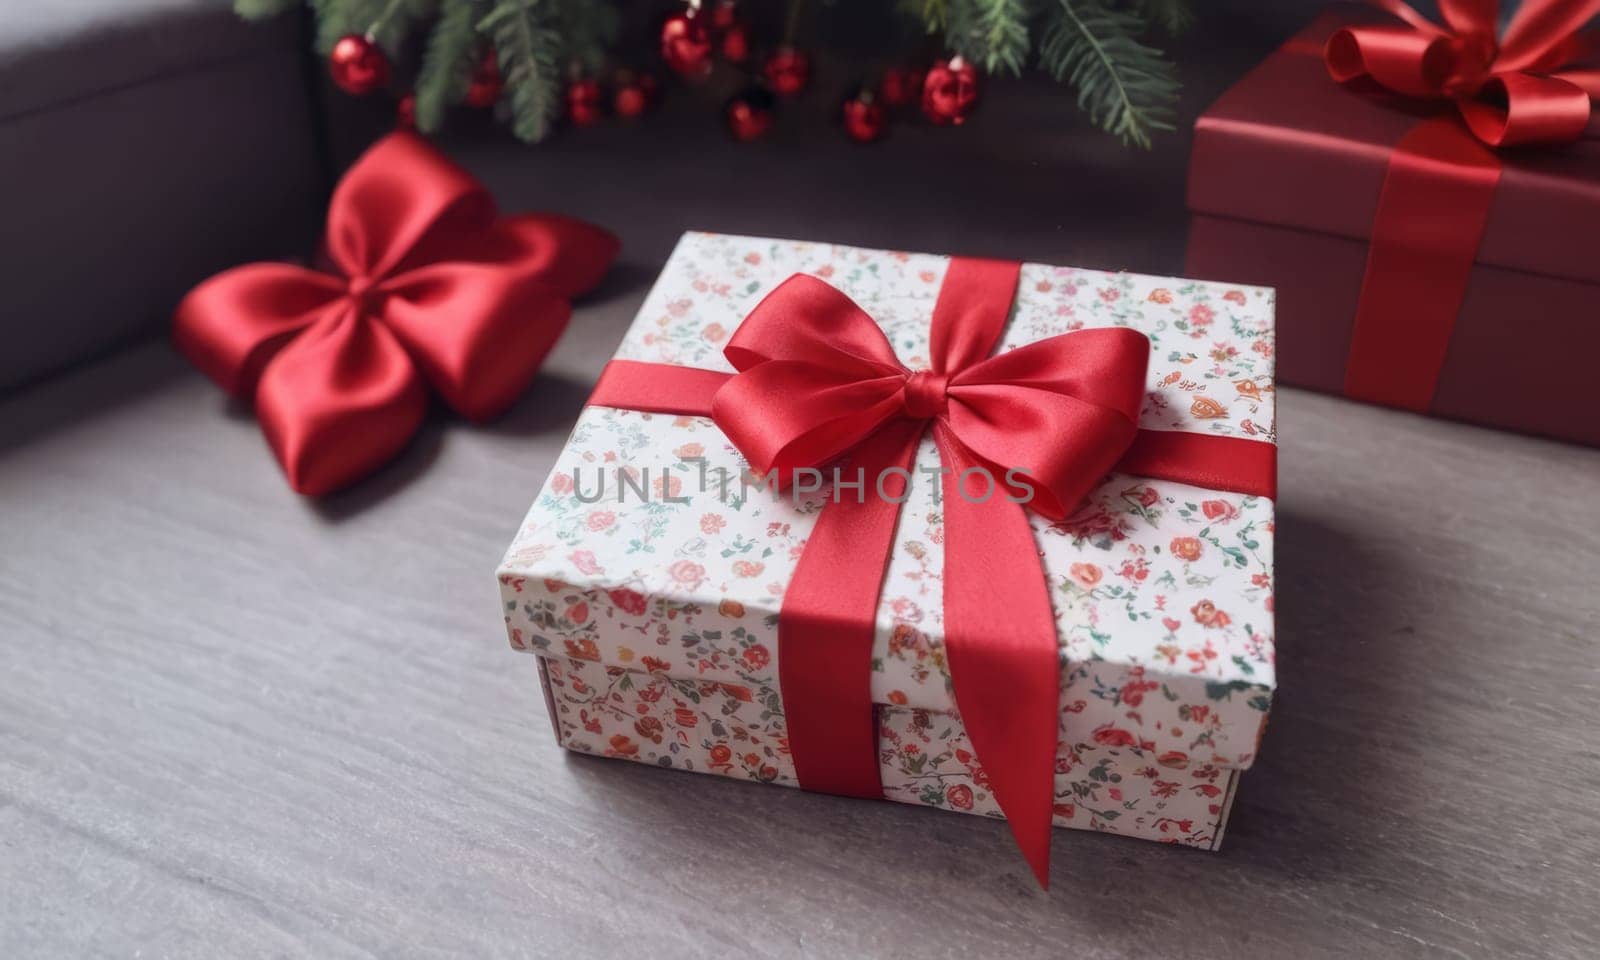 A beautifully wrapped gift adorned with a vibrant red bow sits elegantly against a backdrop of more presents and festive decorations. The scene captures the spirit of giving and the joy of the holiday season.